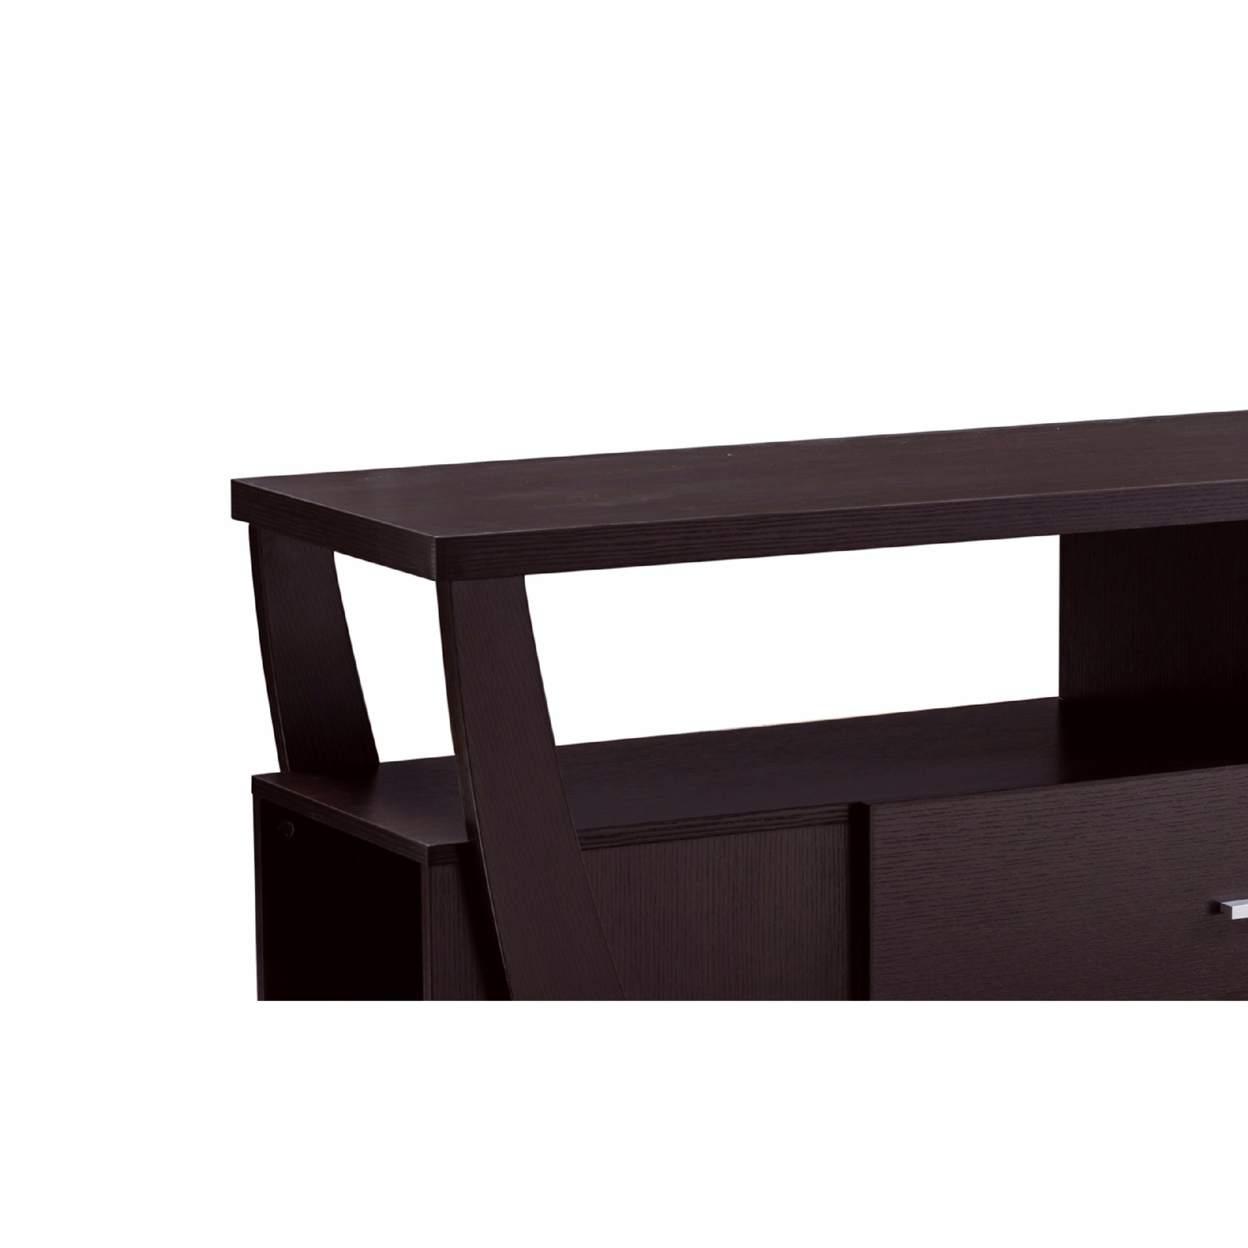 Modern Style TV Stand With 2 Open Shelves And 2 Side Shelves, Brown- Saltoro Sherpi